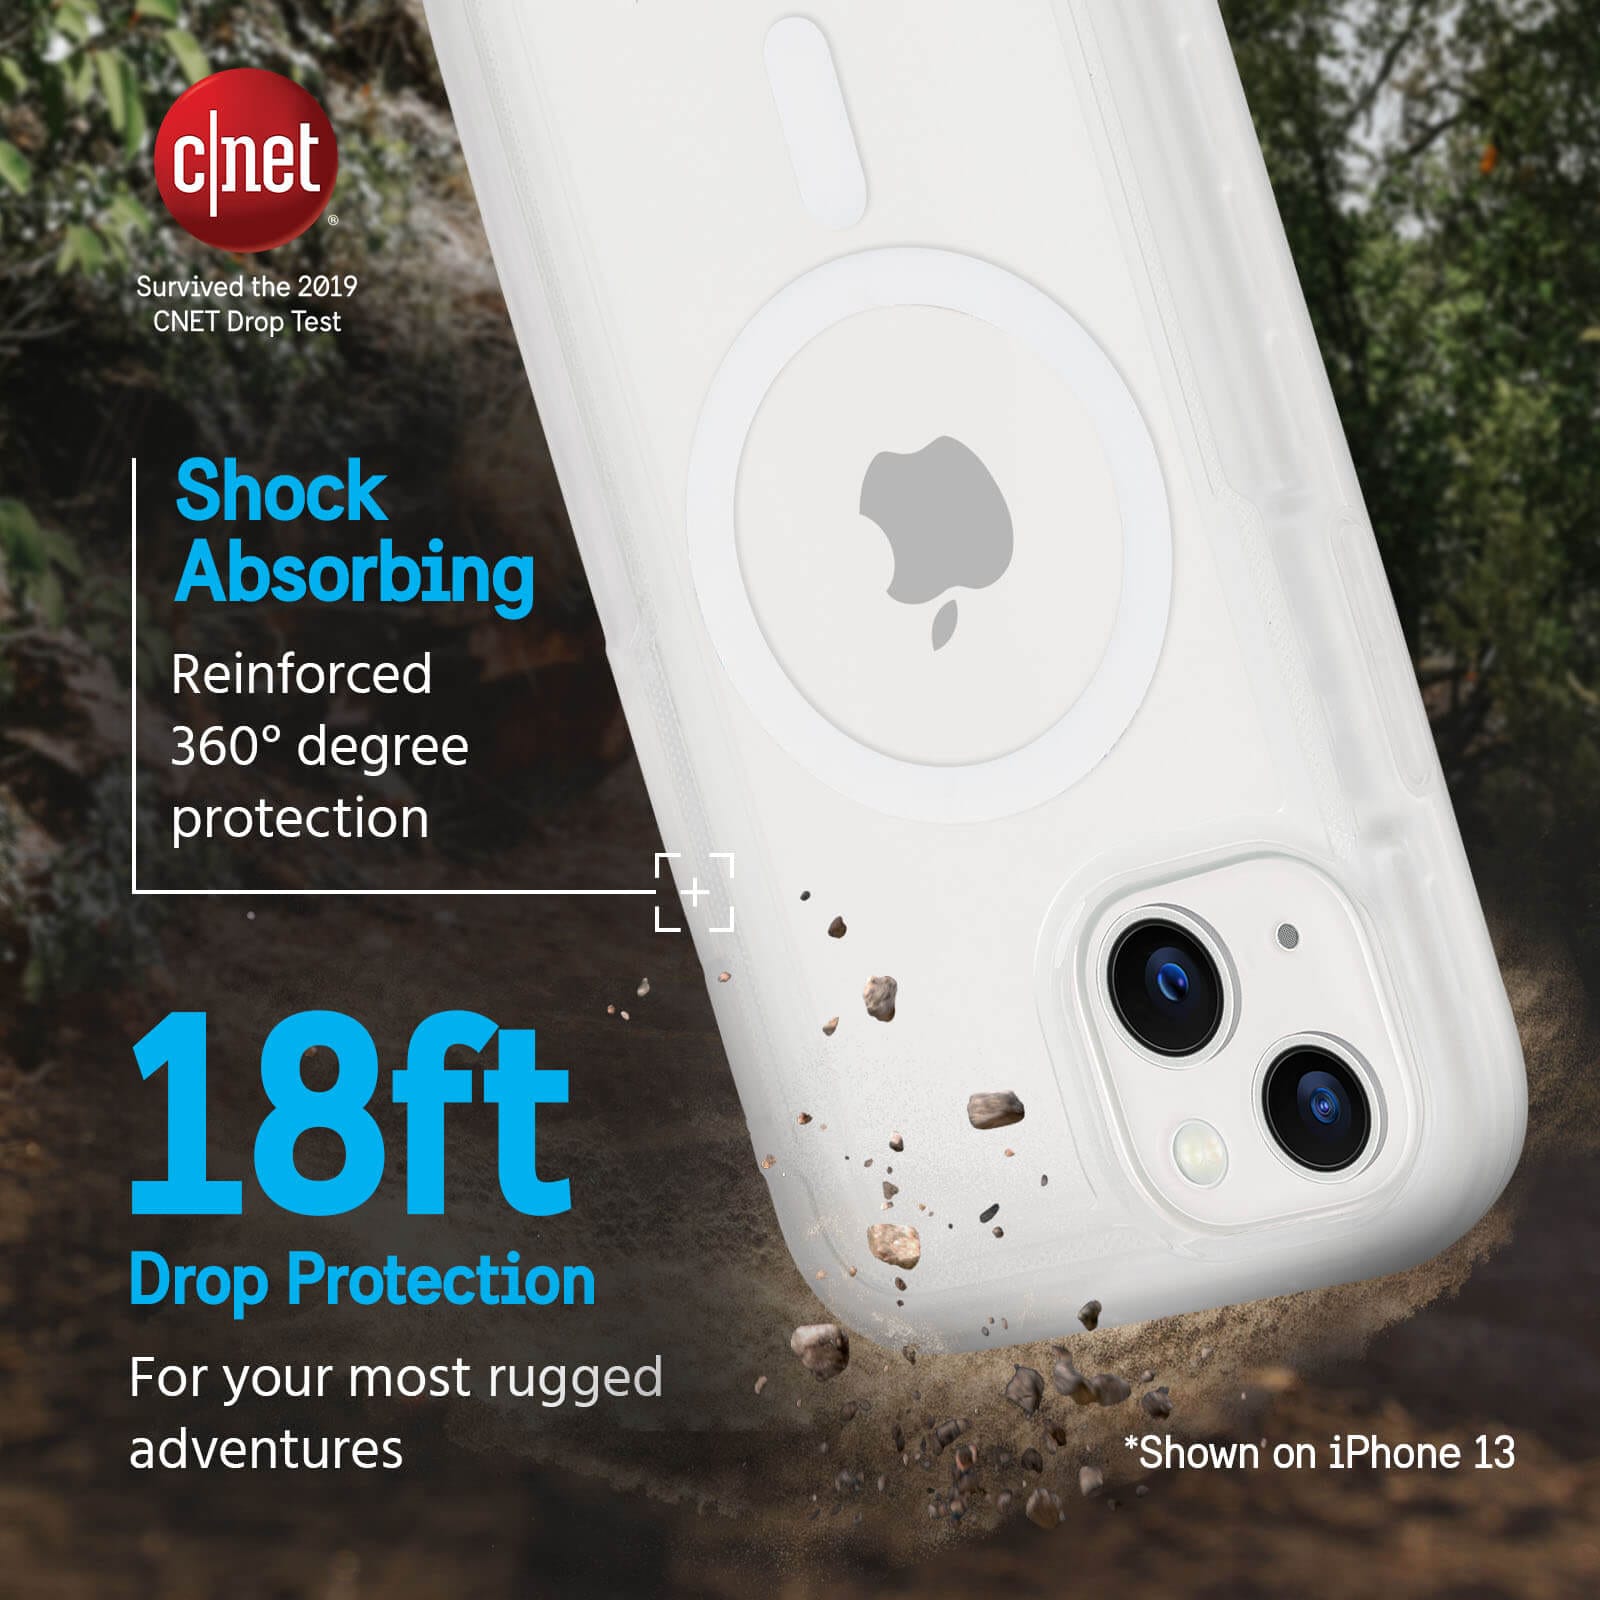 Survived 2019 CNET Drop Test. Shock absorbing reinforced 360 degree protection. 18ft Drop Protection for your most rugged adventures. color::Clear